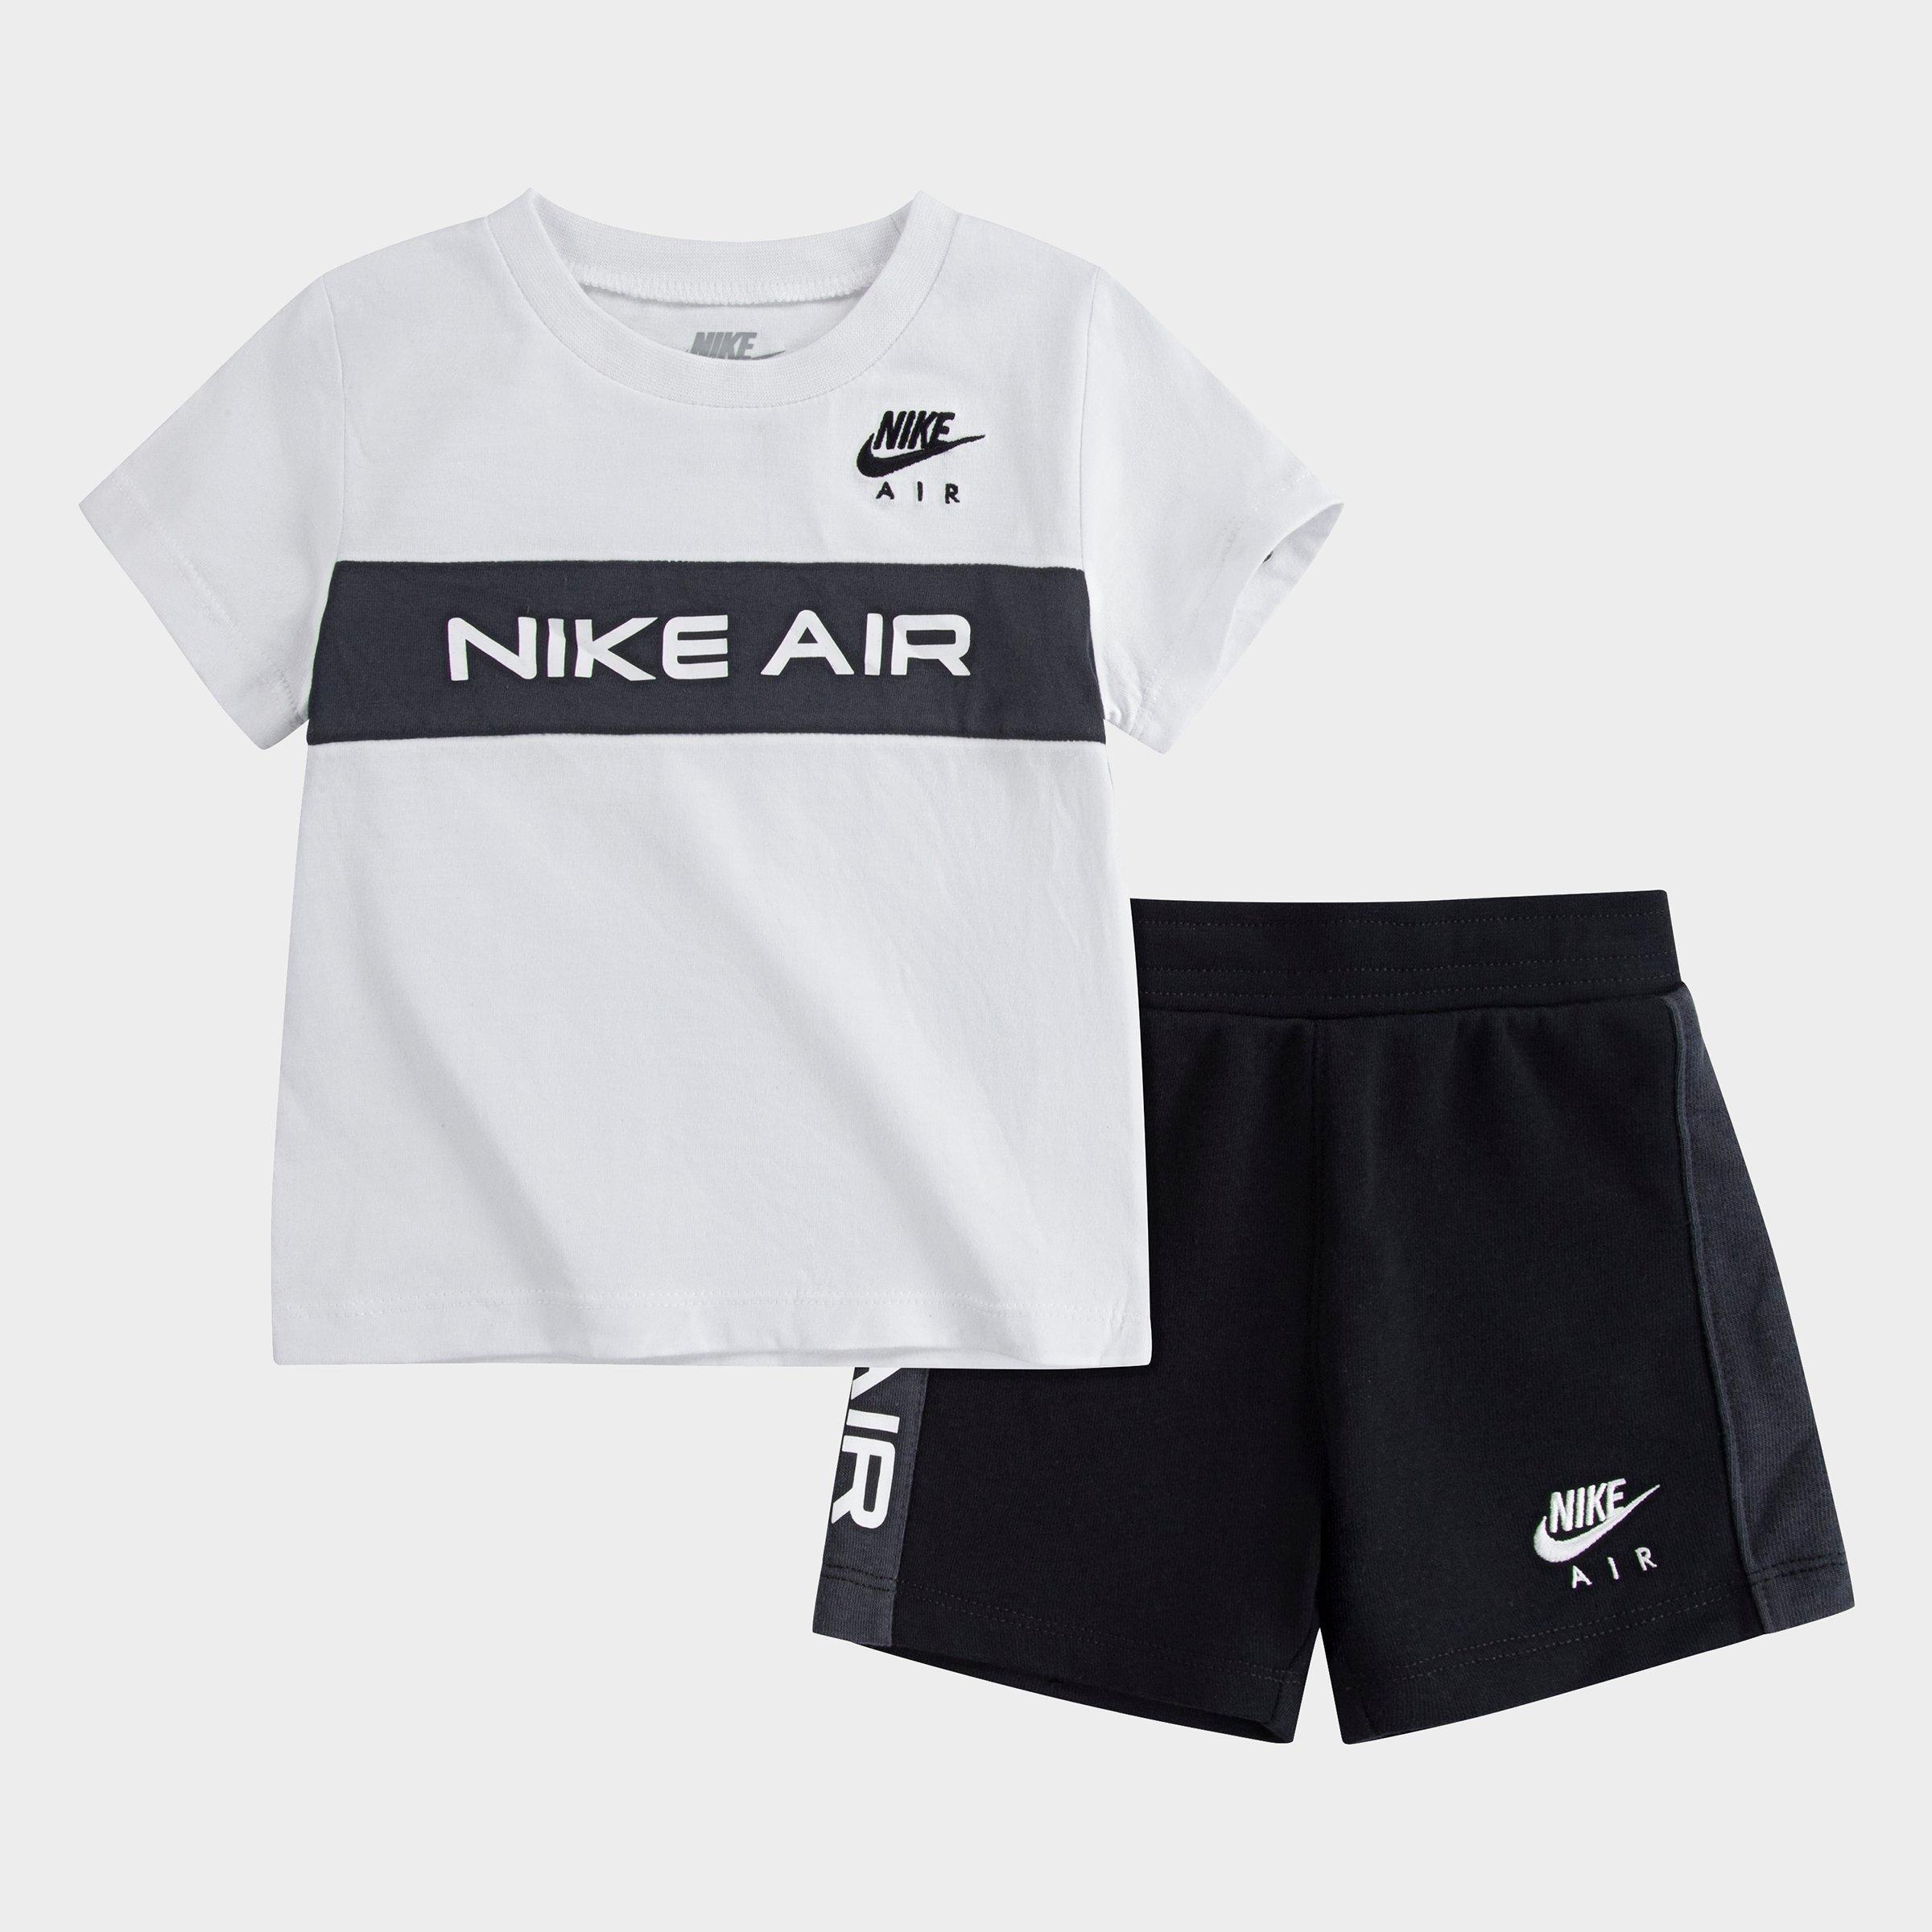 Boys' Infant Nike Air T-Shirt and 